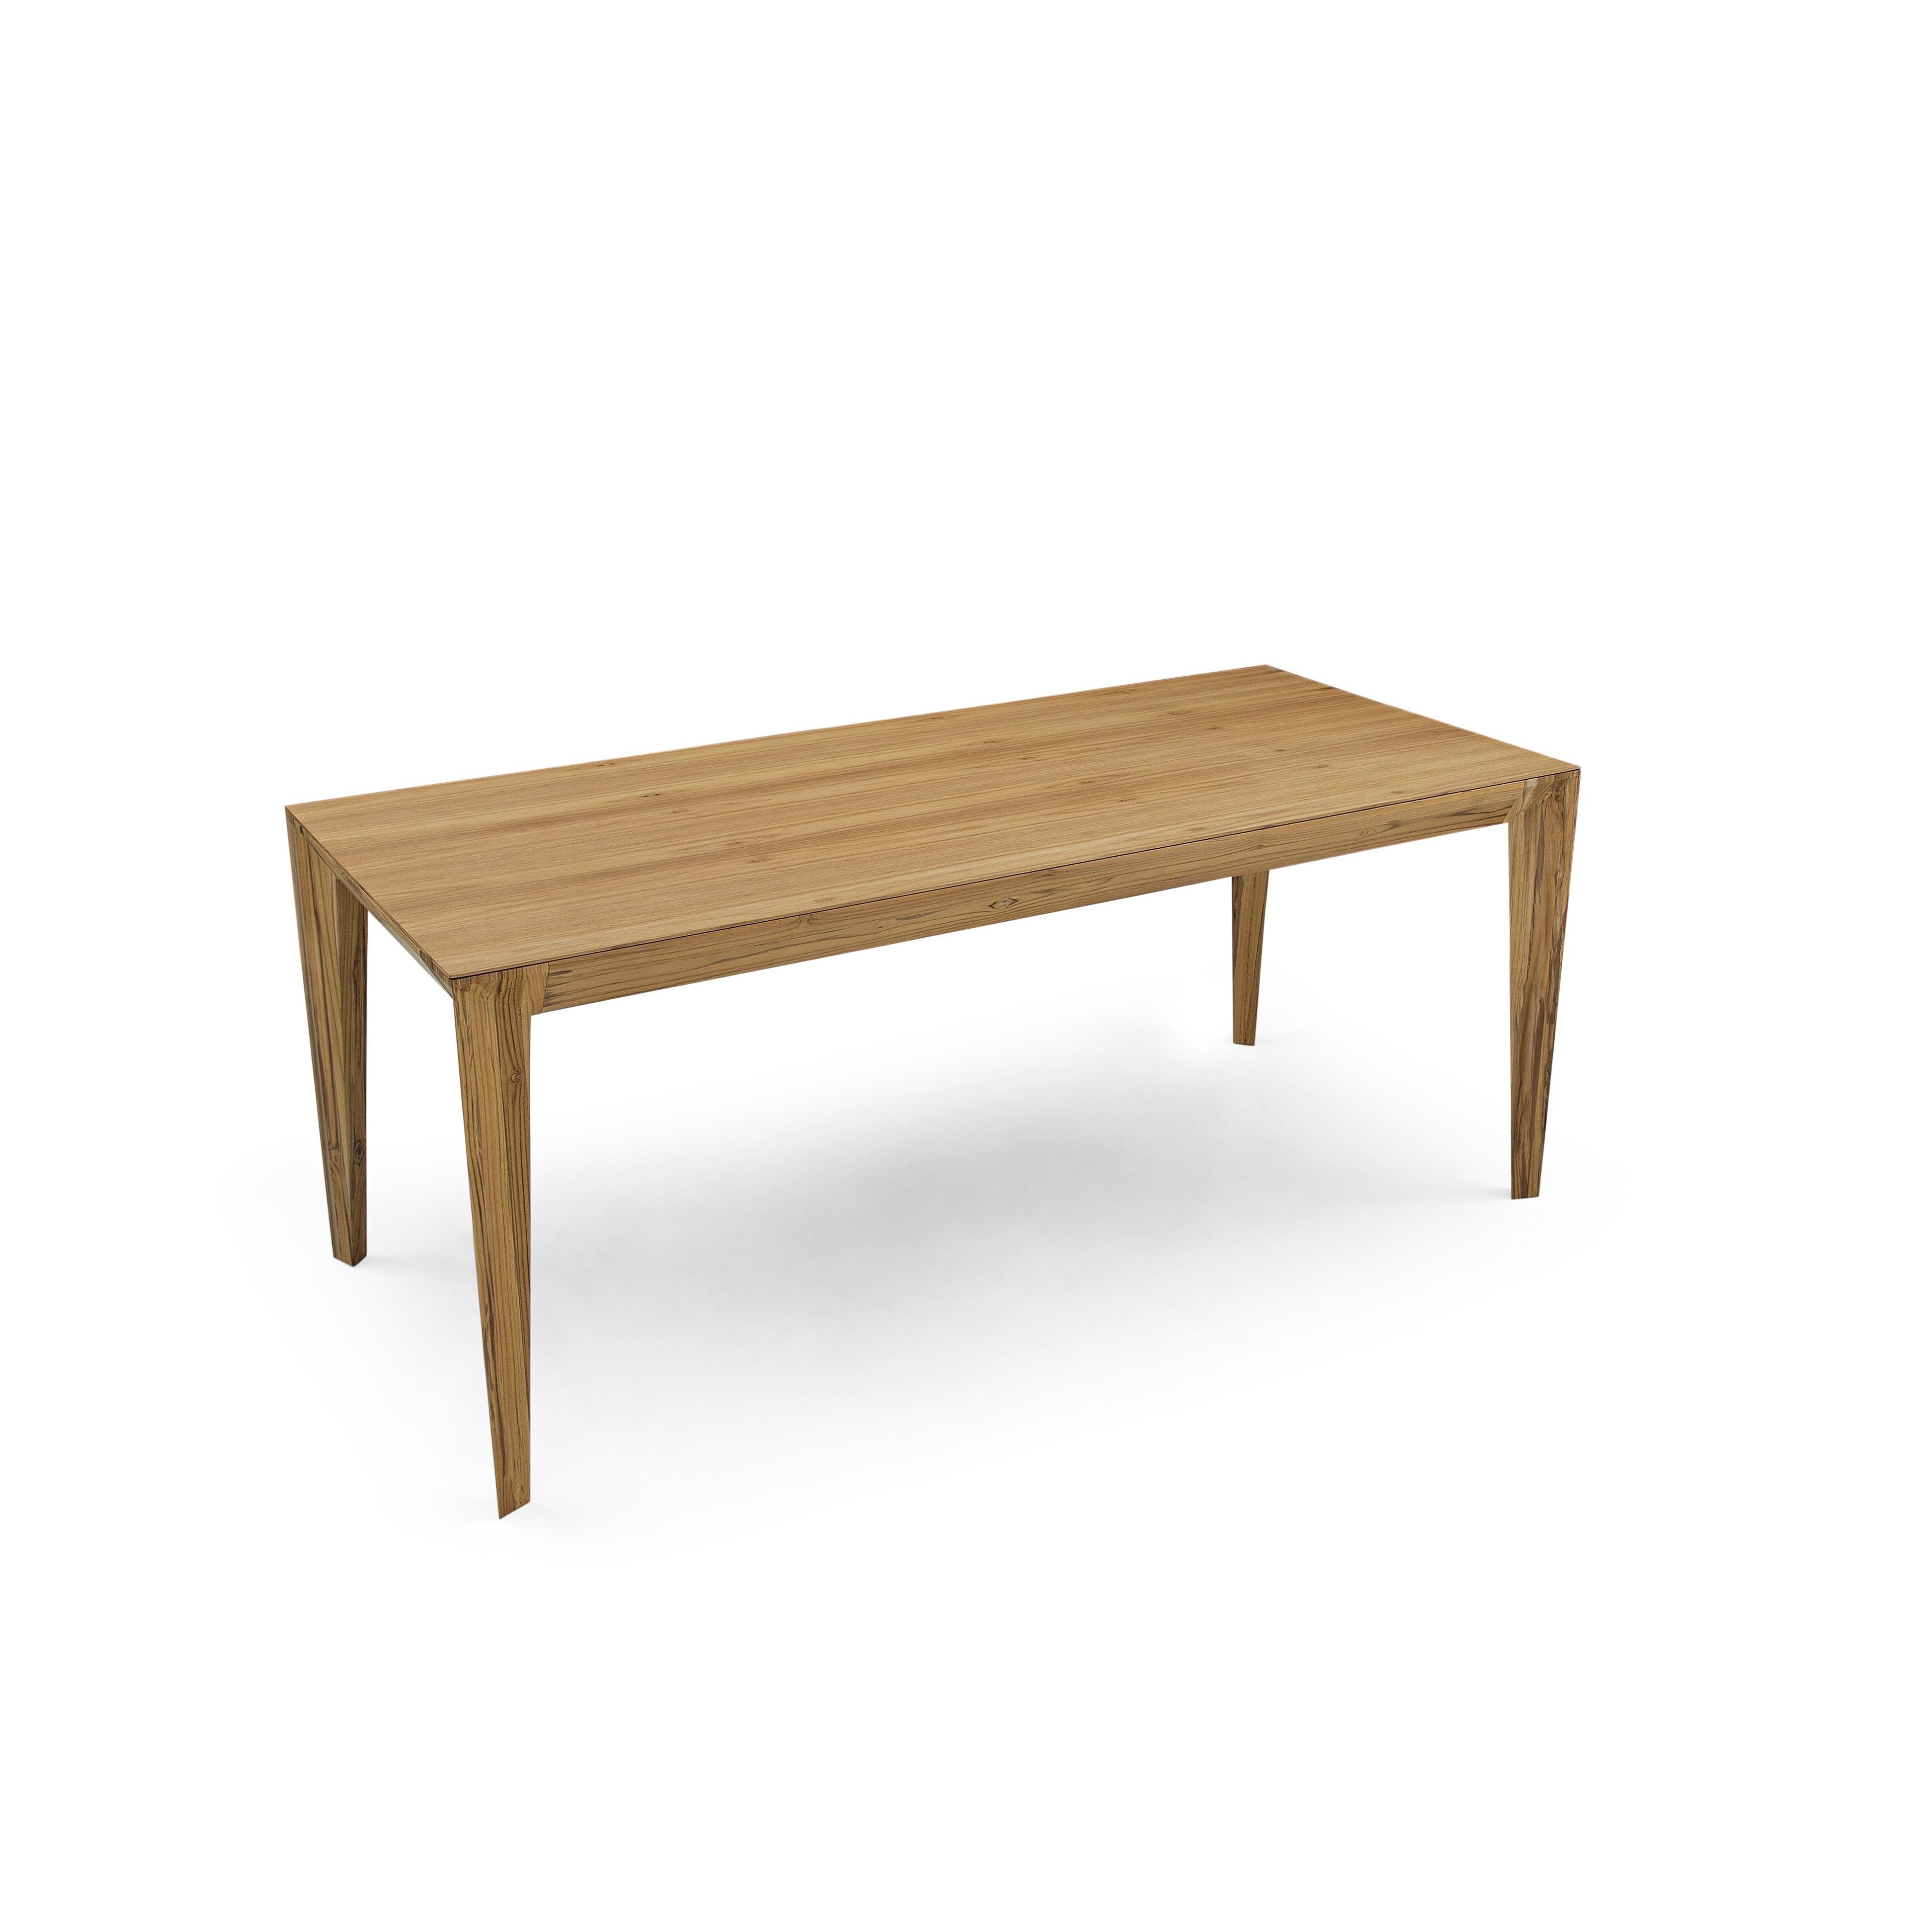 Contemporary Luce Rectangular Dining Table with a Teak Wood Veneered Table Top 70'' For Sale